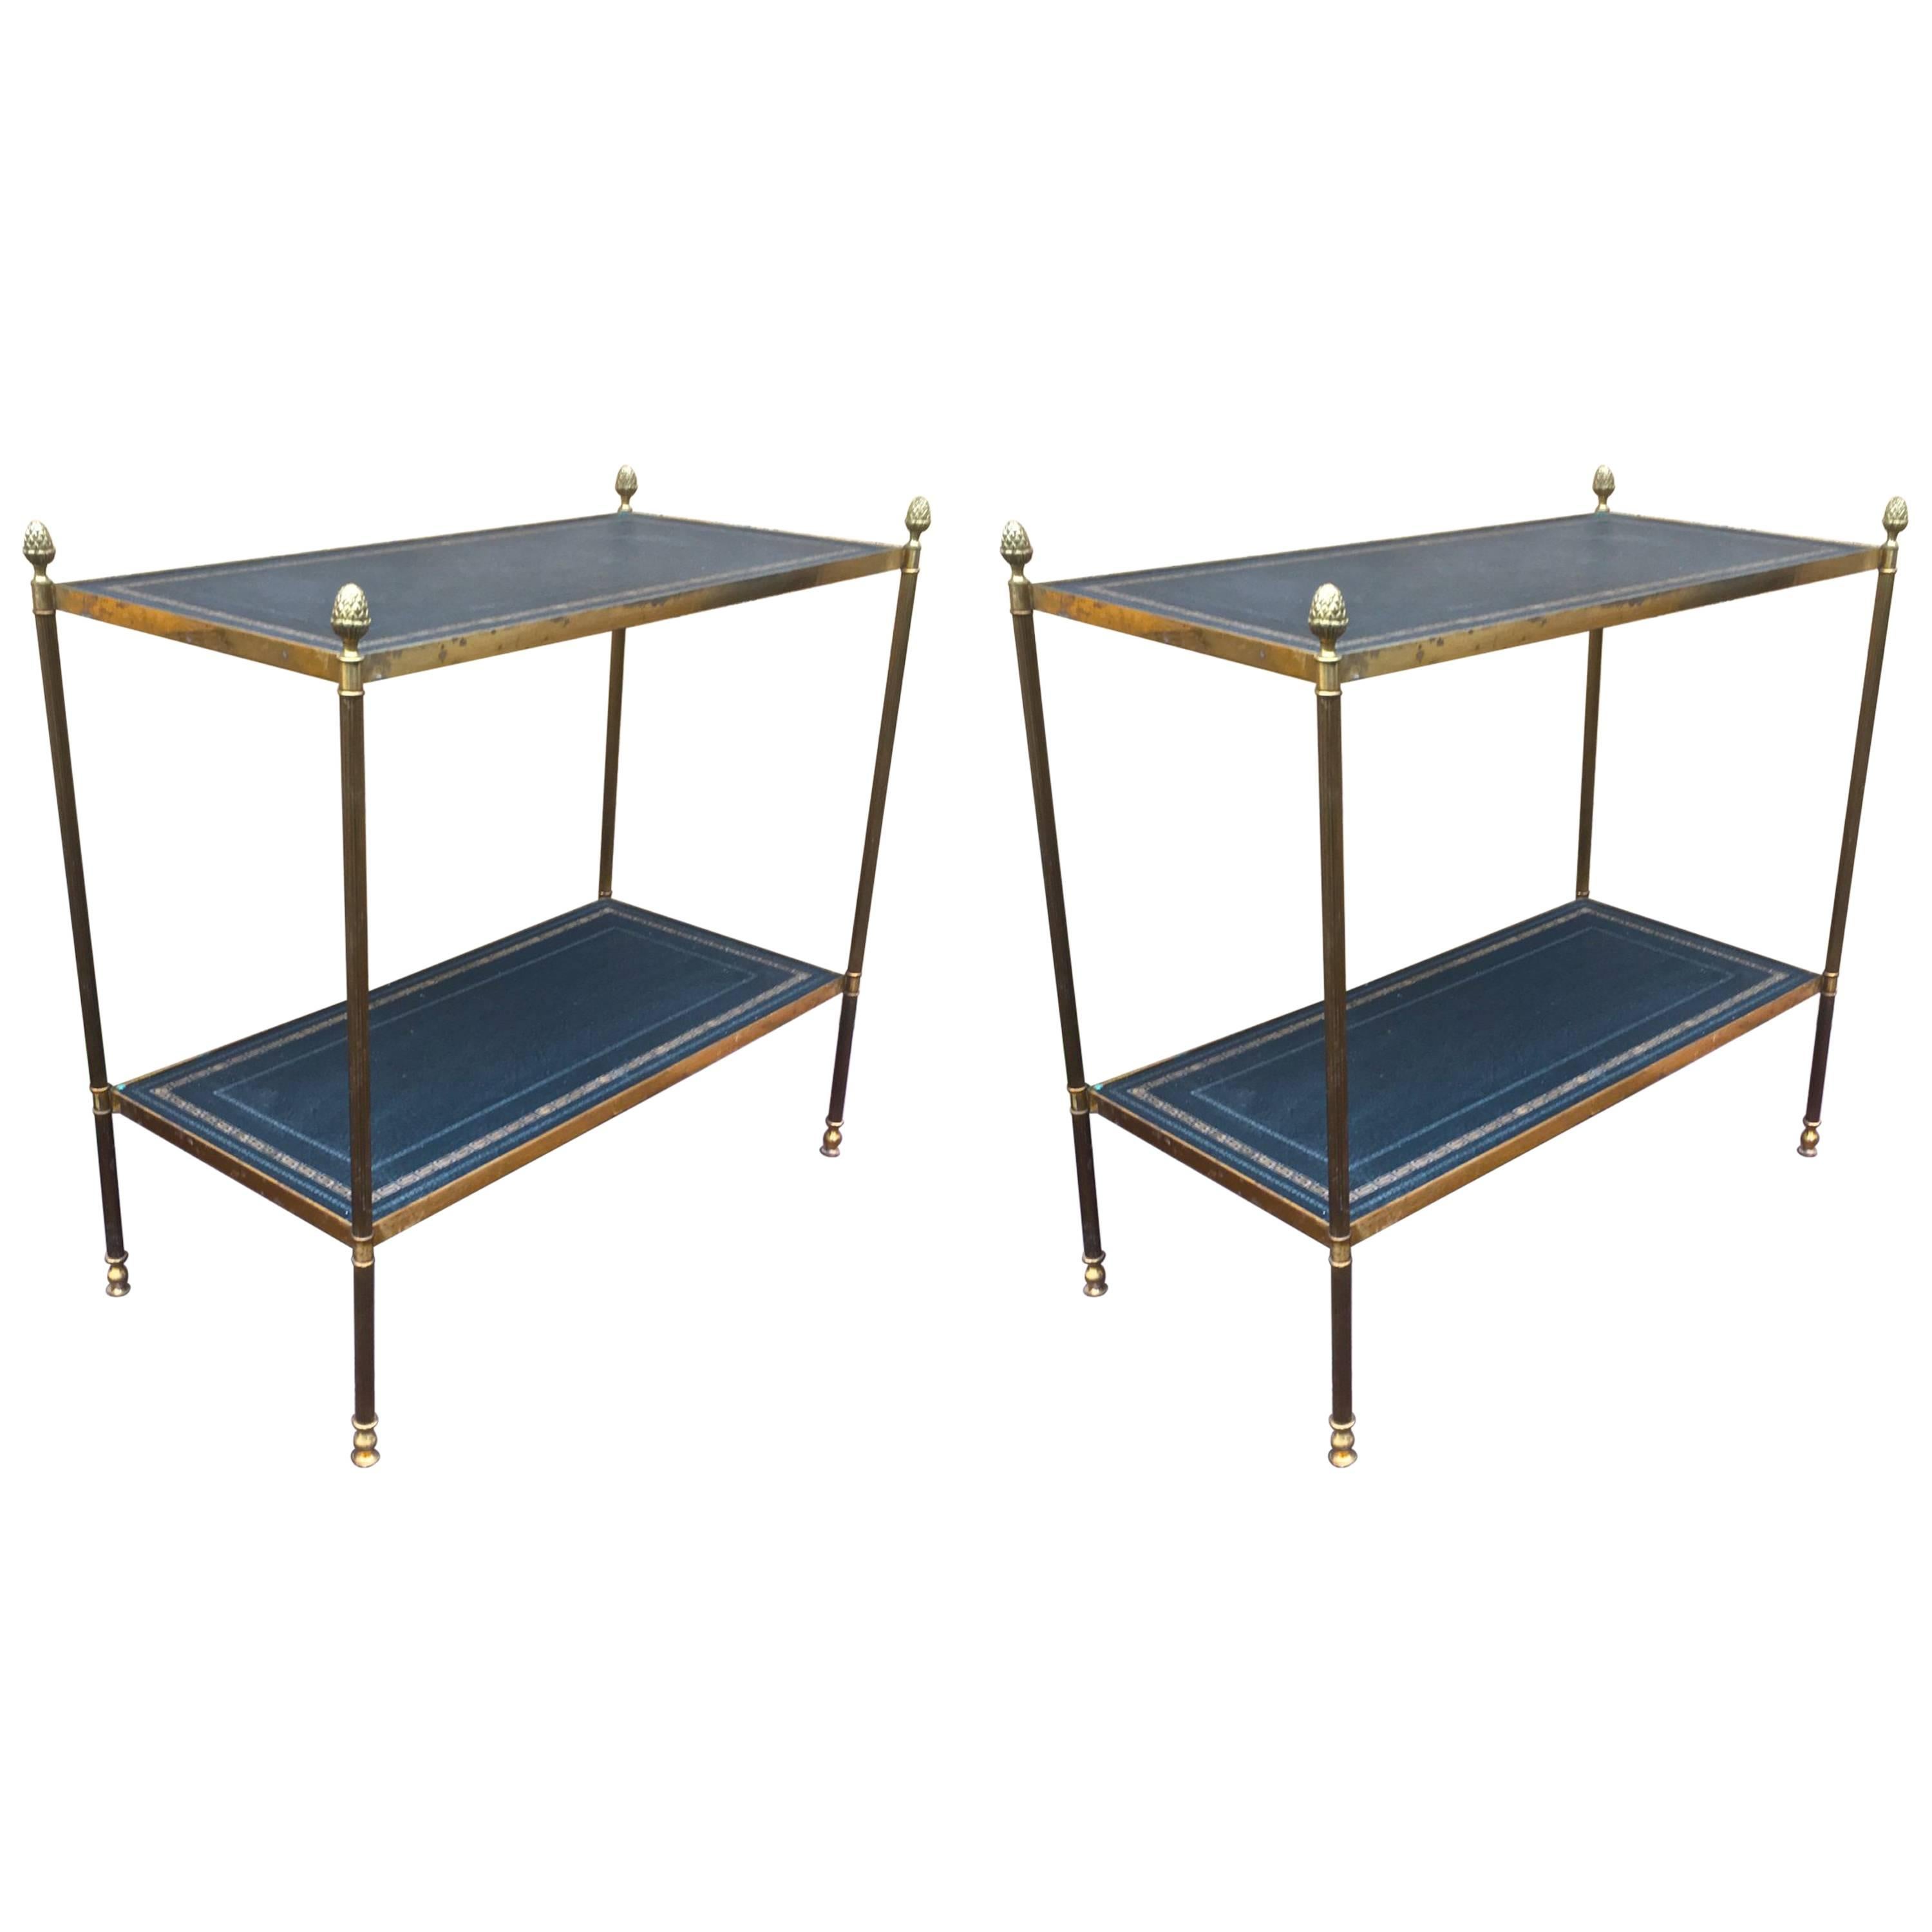 Maison Jansen Pair of Two-Tier Neoclassic Side Table with Gold Adorn Leather Top For Sale